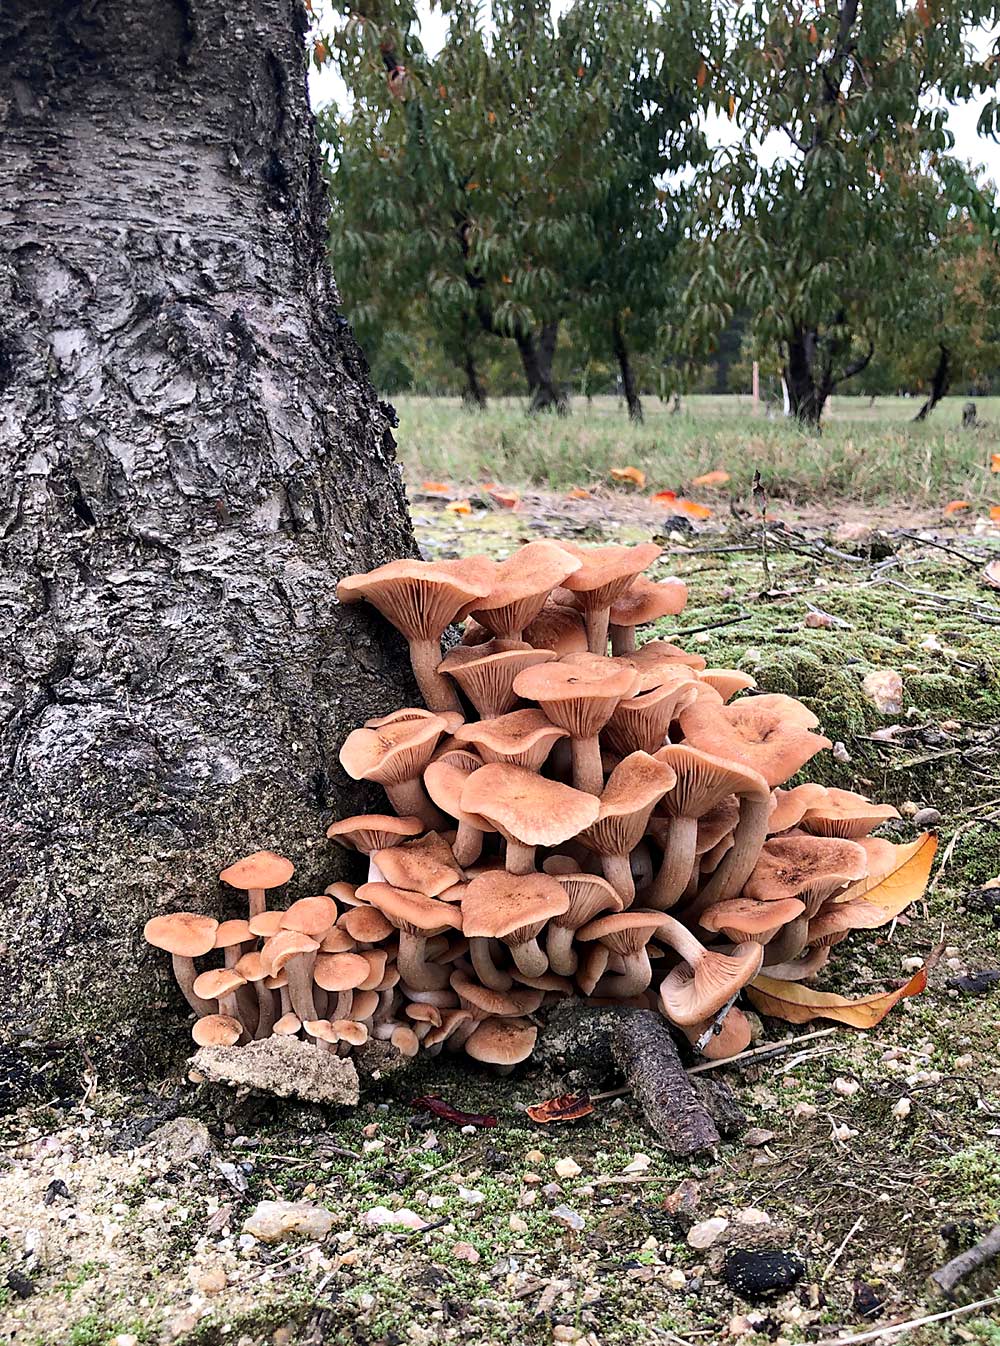 After a good fall or spring rain, mushrooms may make a short-lived appearance at the base of infested trees. (Courtesy Guido Schnabel/Clemson University)